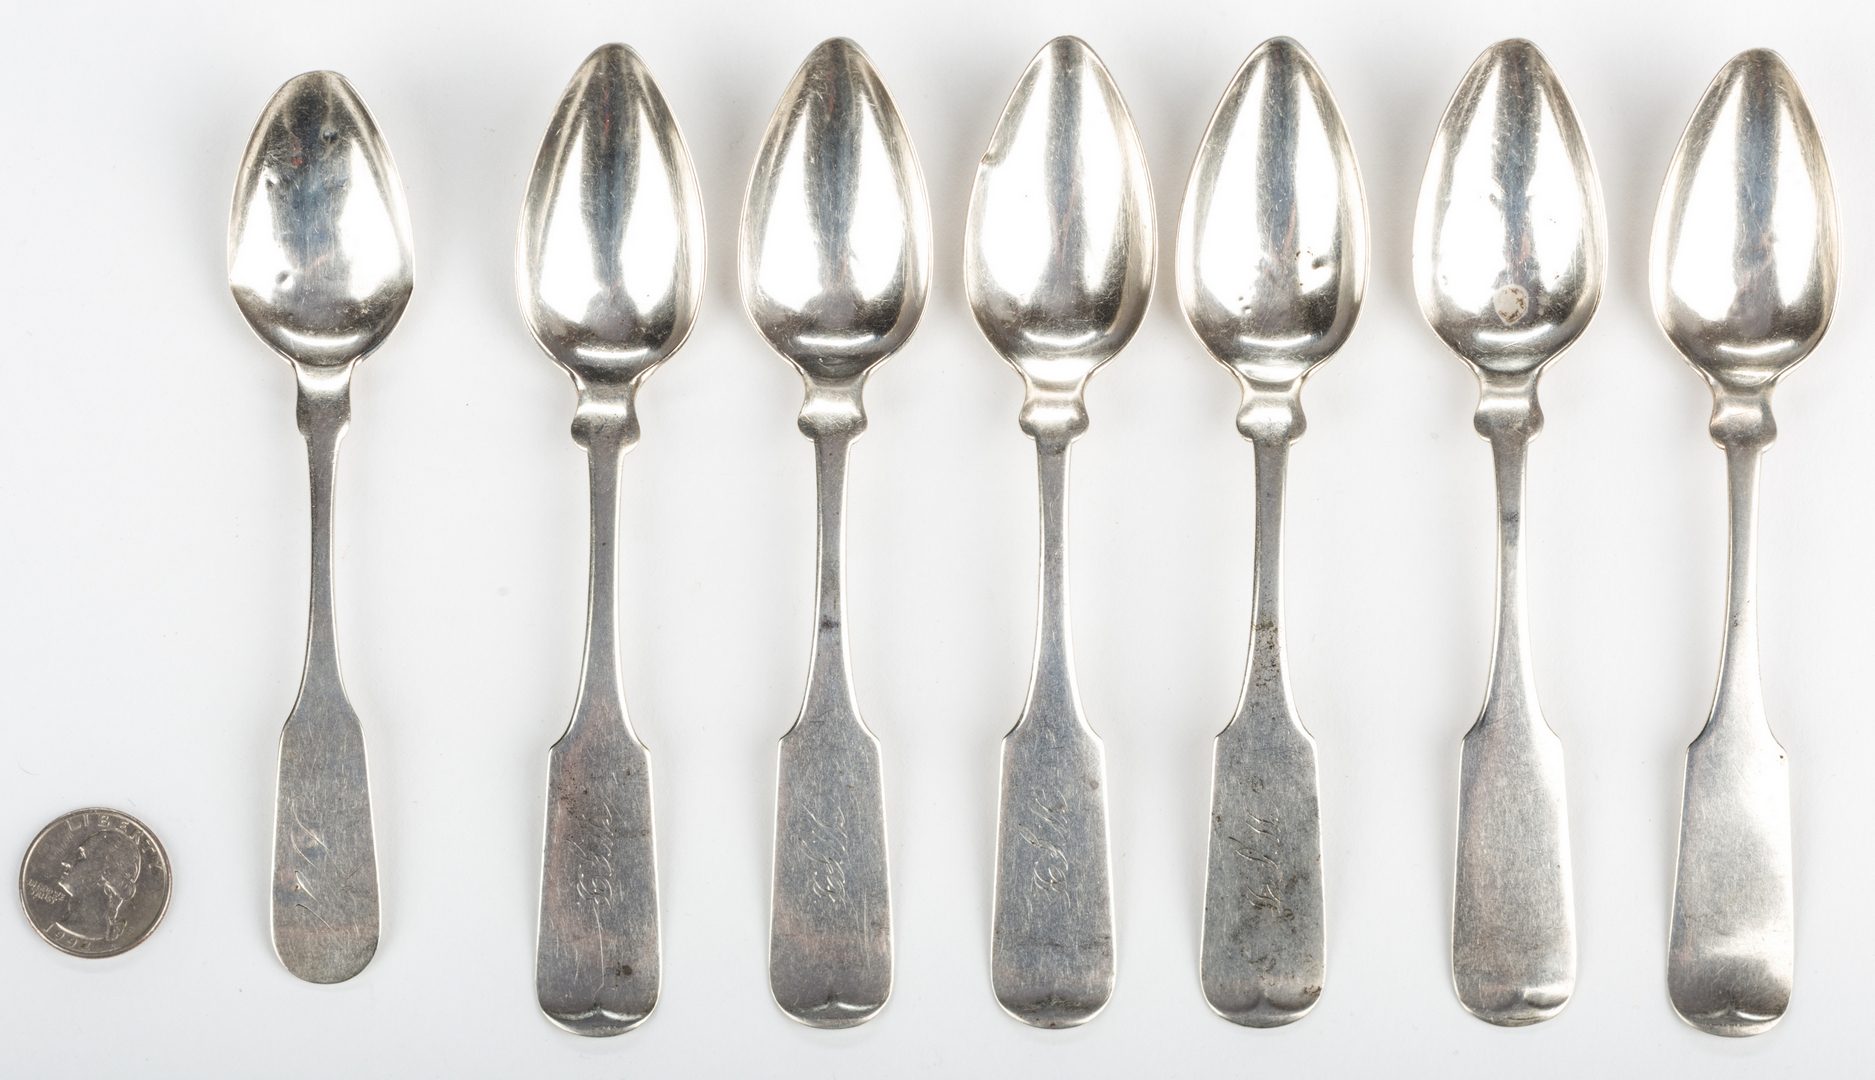 Lot 285: 7 Georgia Related Coin Silver Teaspoons